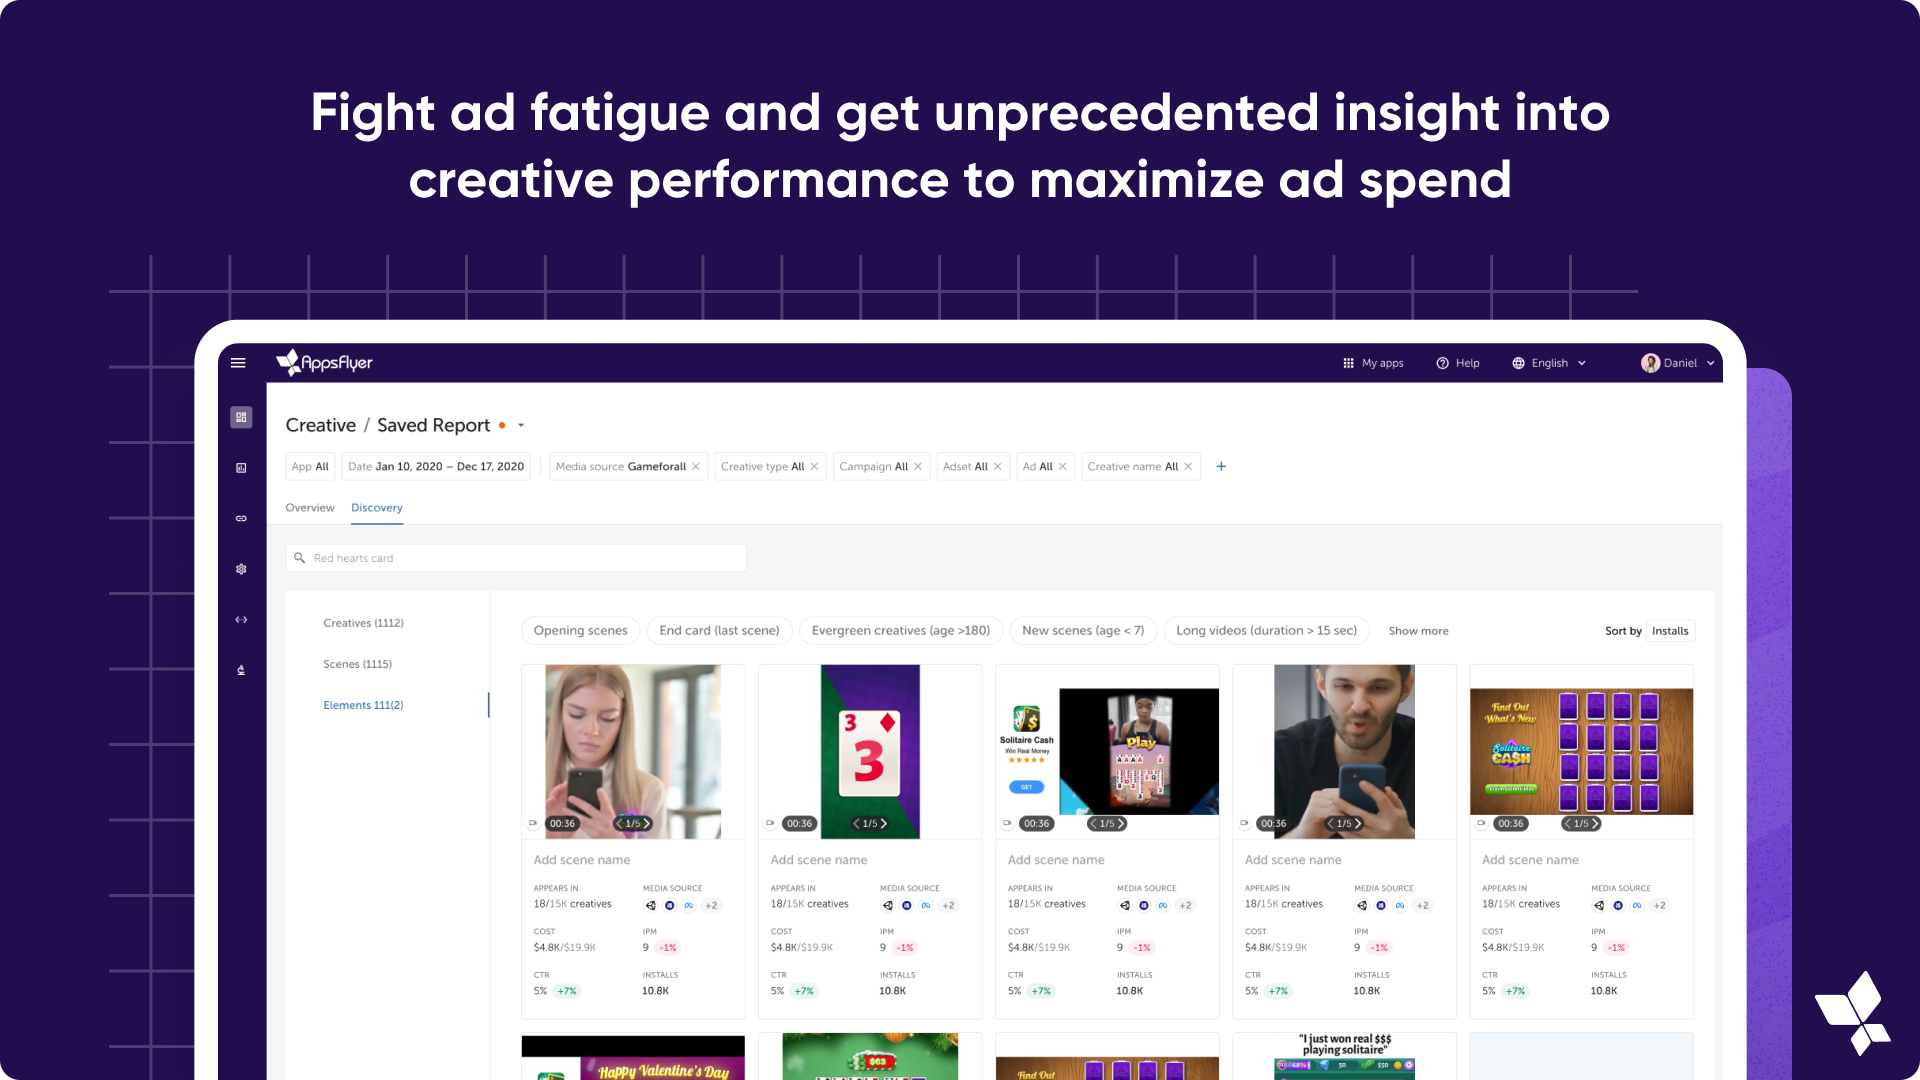 Fight ad fatigue and get unprecedented insight into creative performance to maximize ad spend
